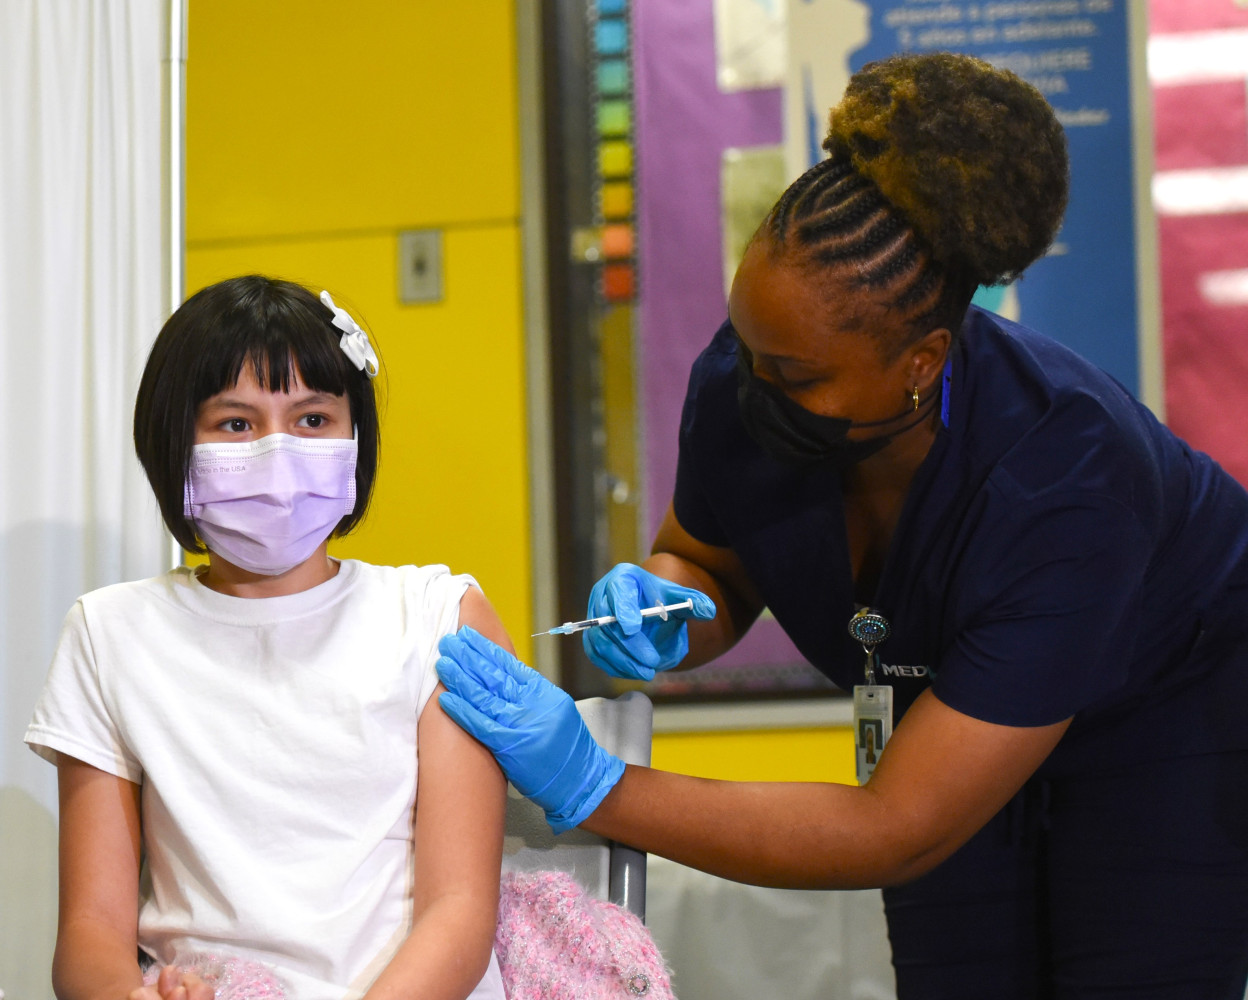 Immunization rates among Peel students have plummeted since the pandemic